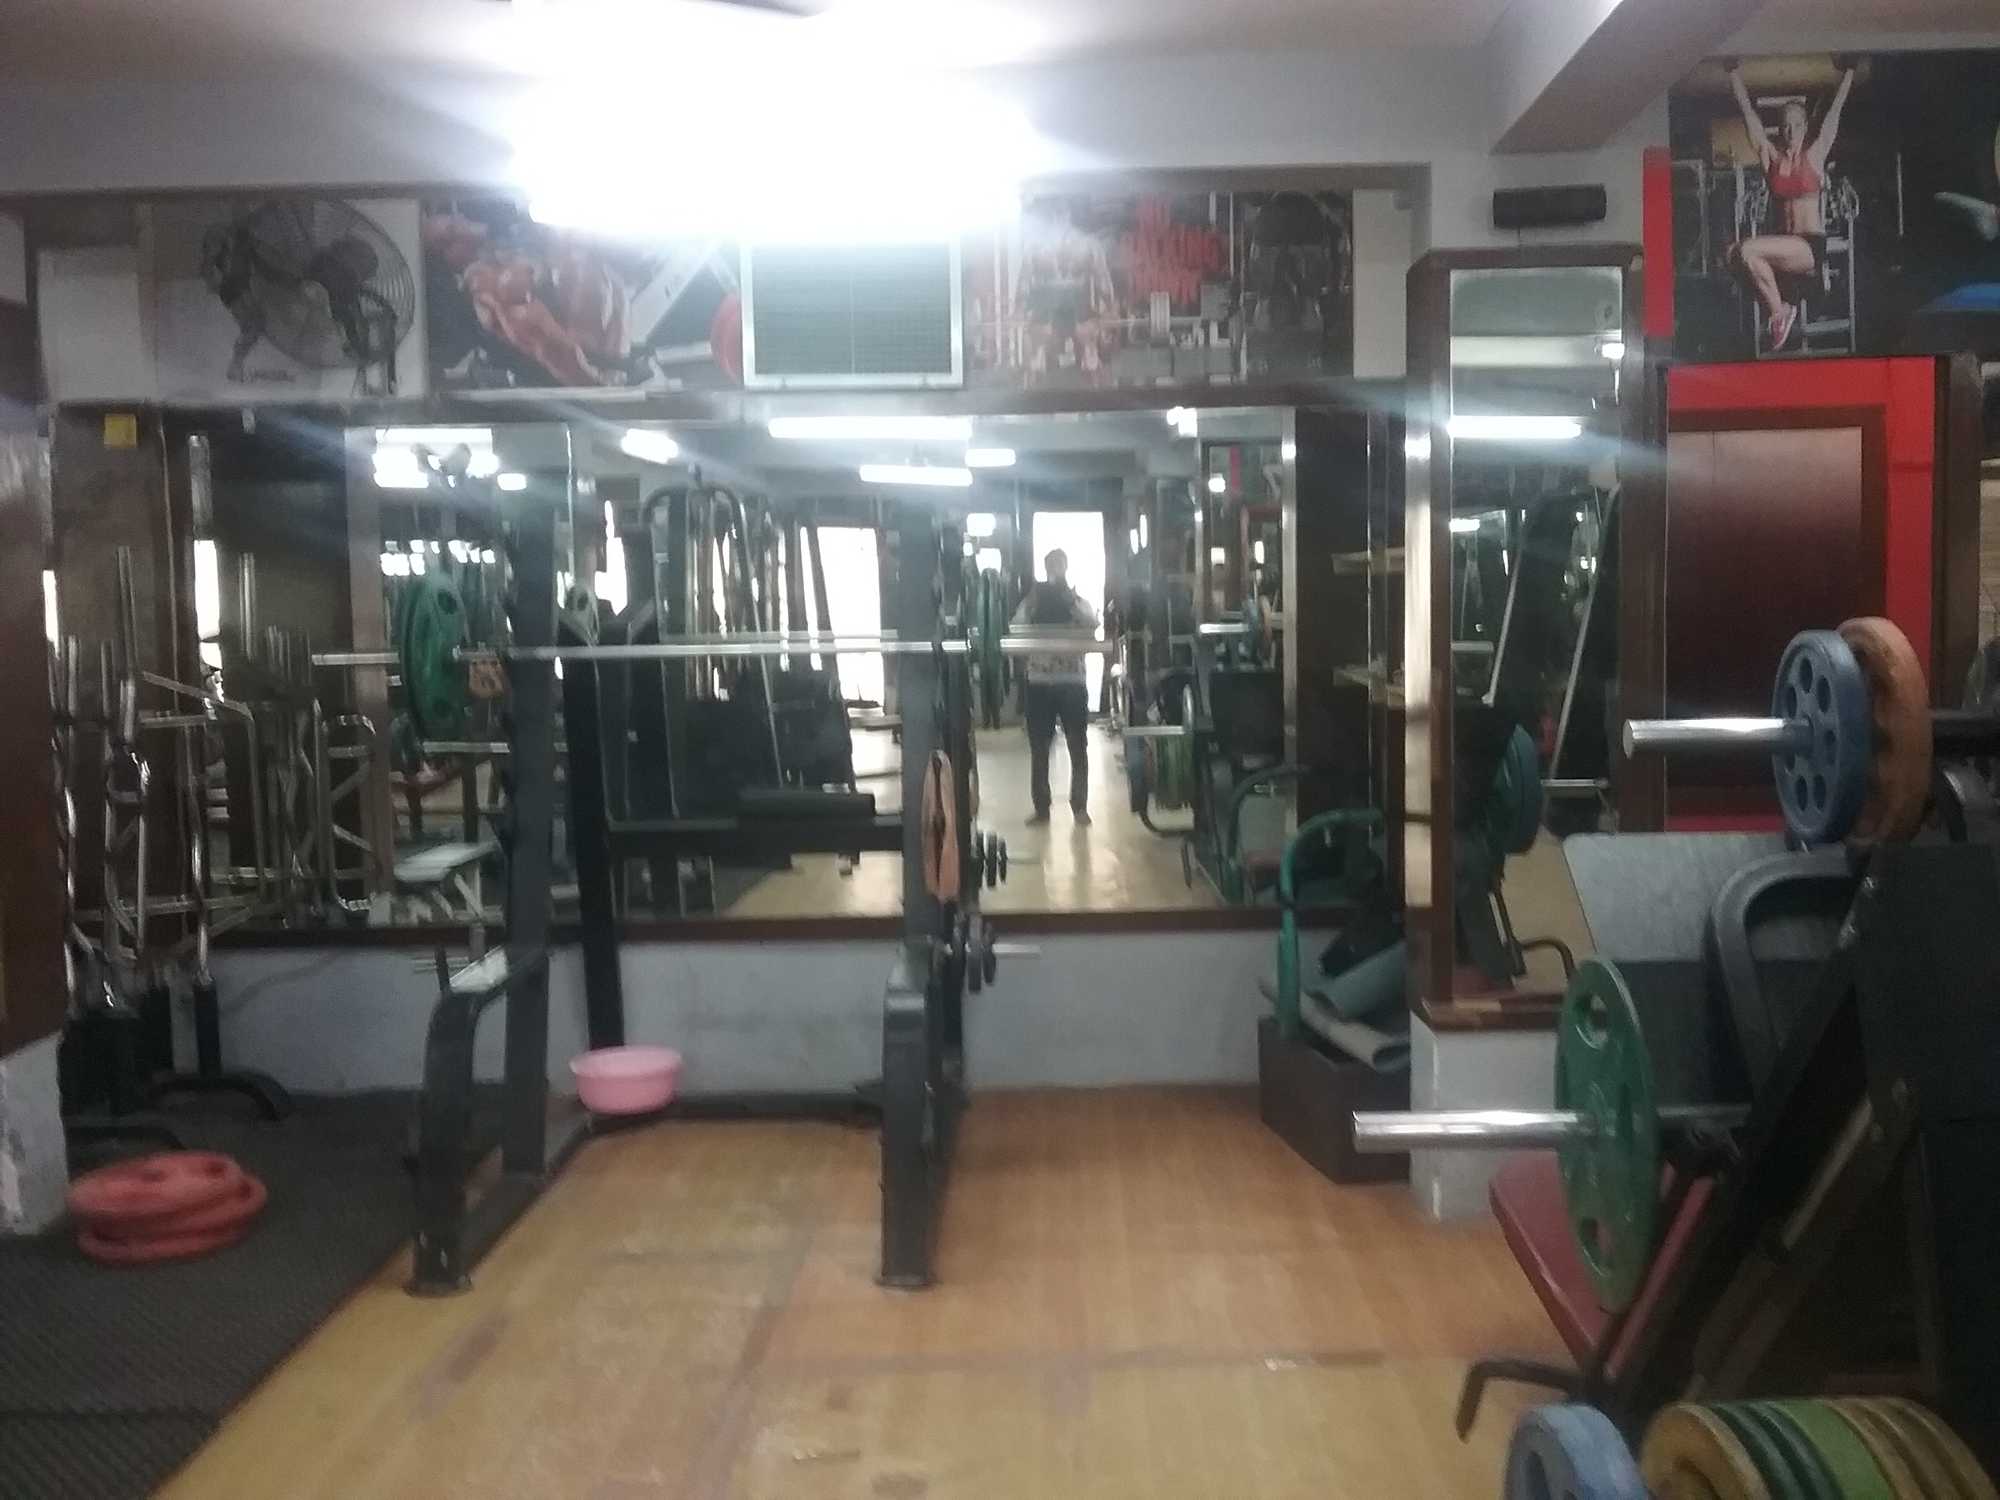 New-Delhi-Palam-Muscle-and-Fitness-Gym_788_Nzg4_MjgwMQ